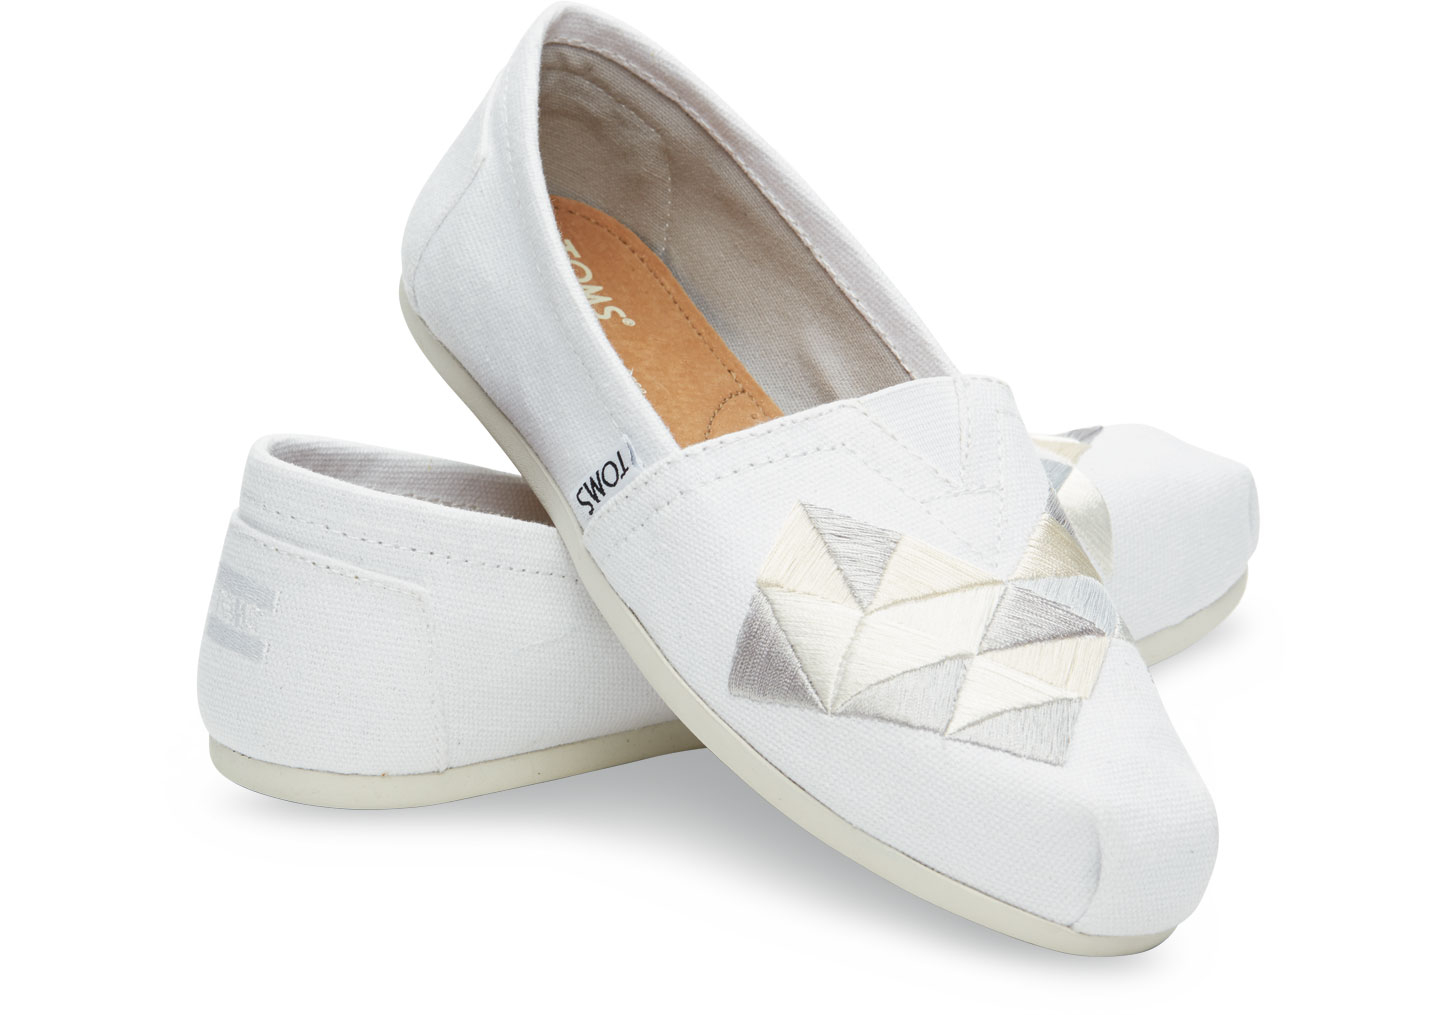 TOMS White Canvas Embroidery Women's 